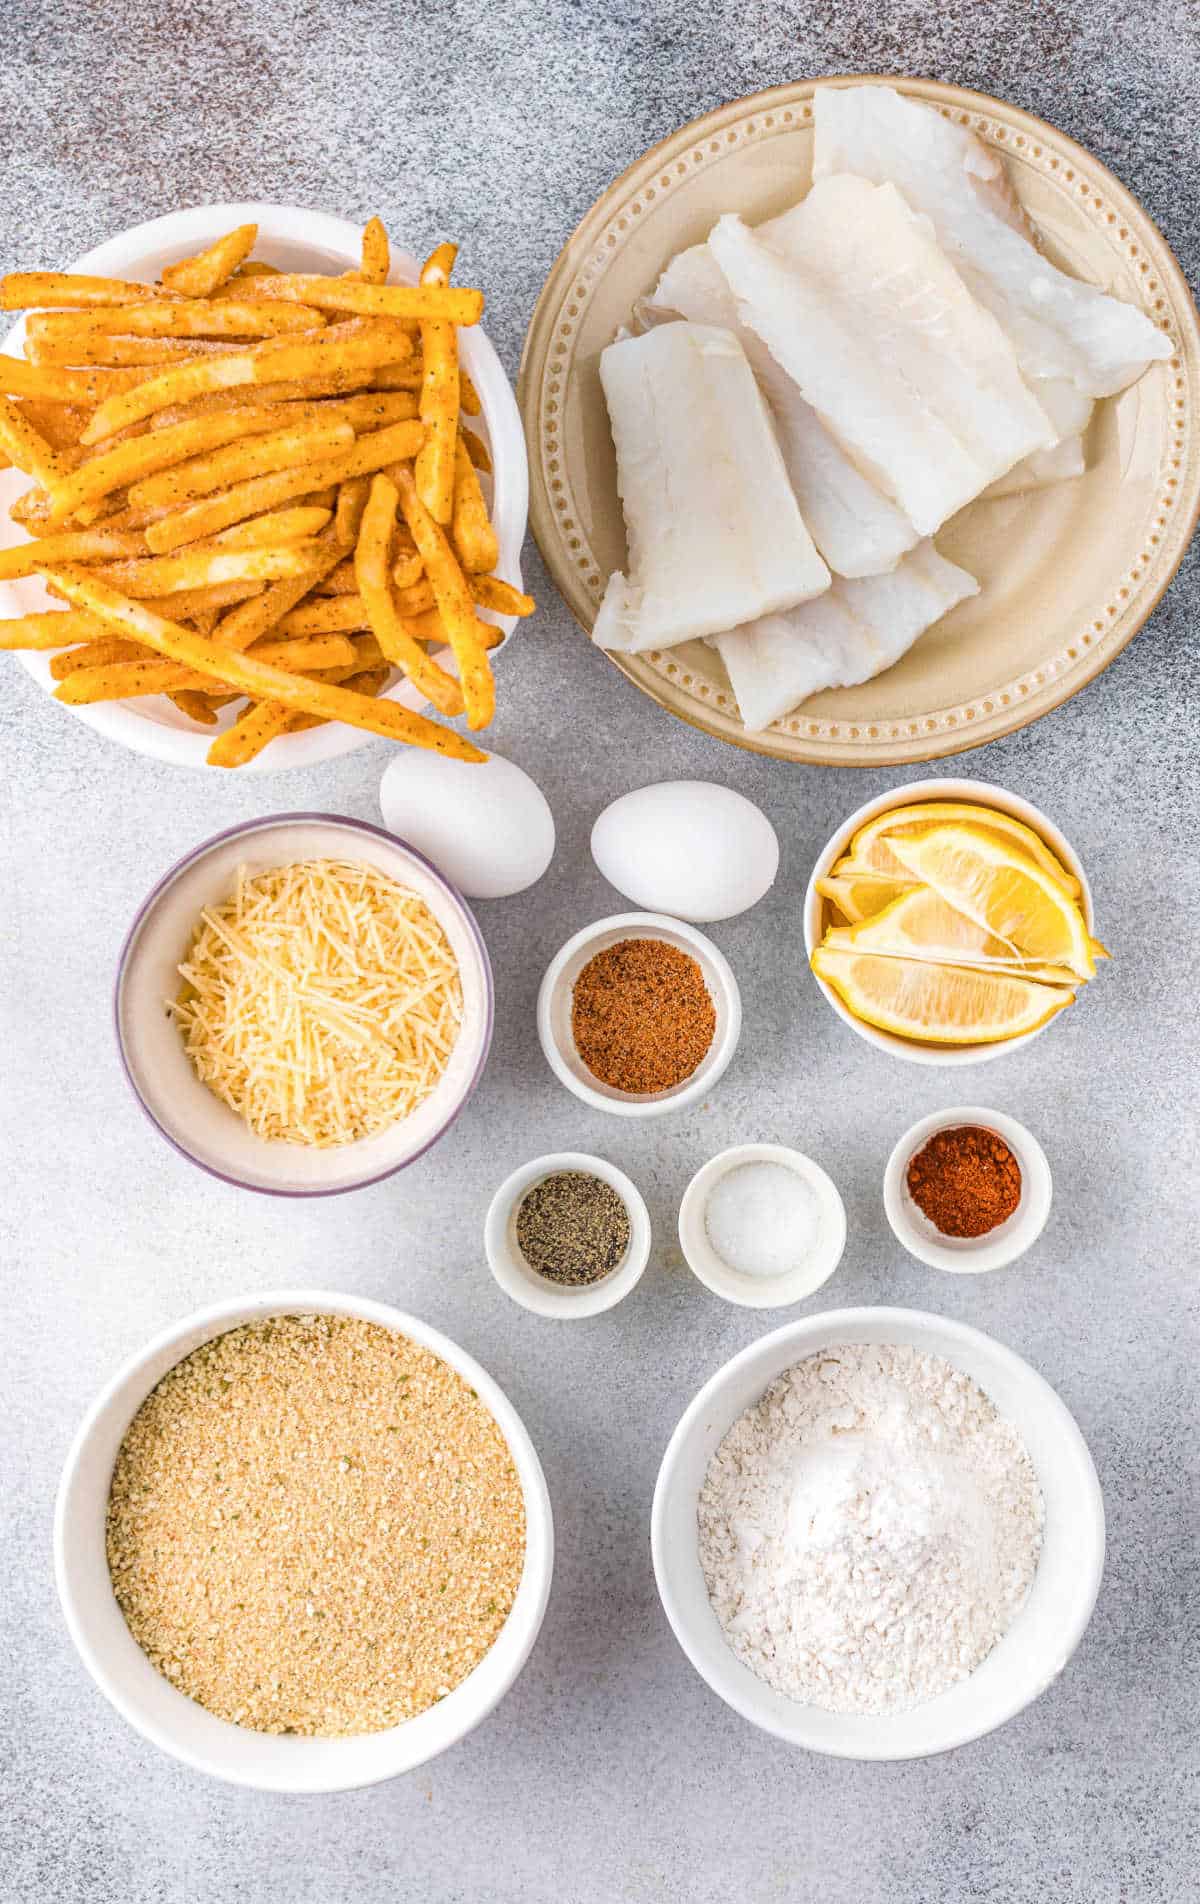 A photo of all the ingredients needed for fish and fries.